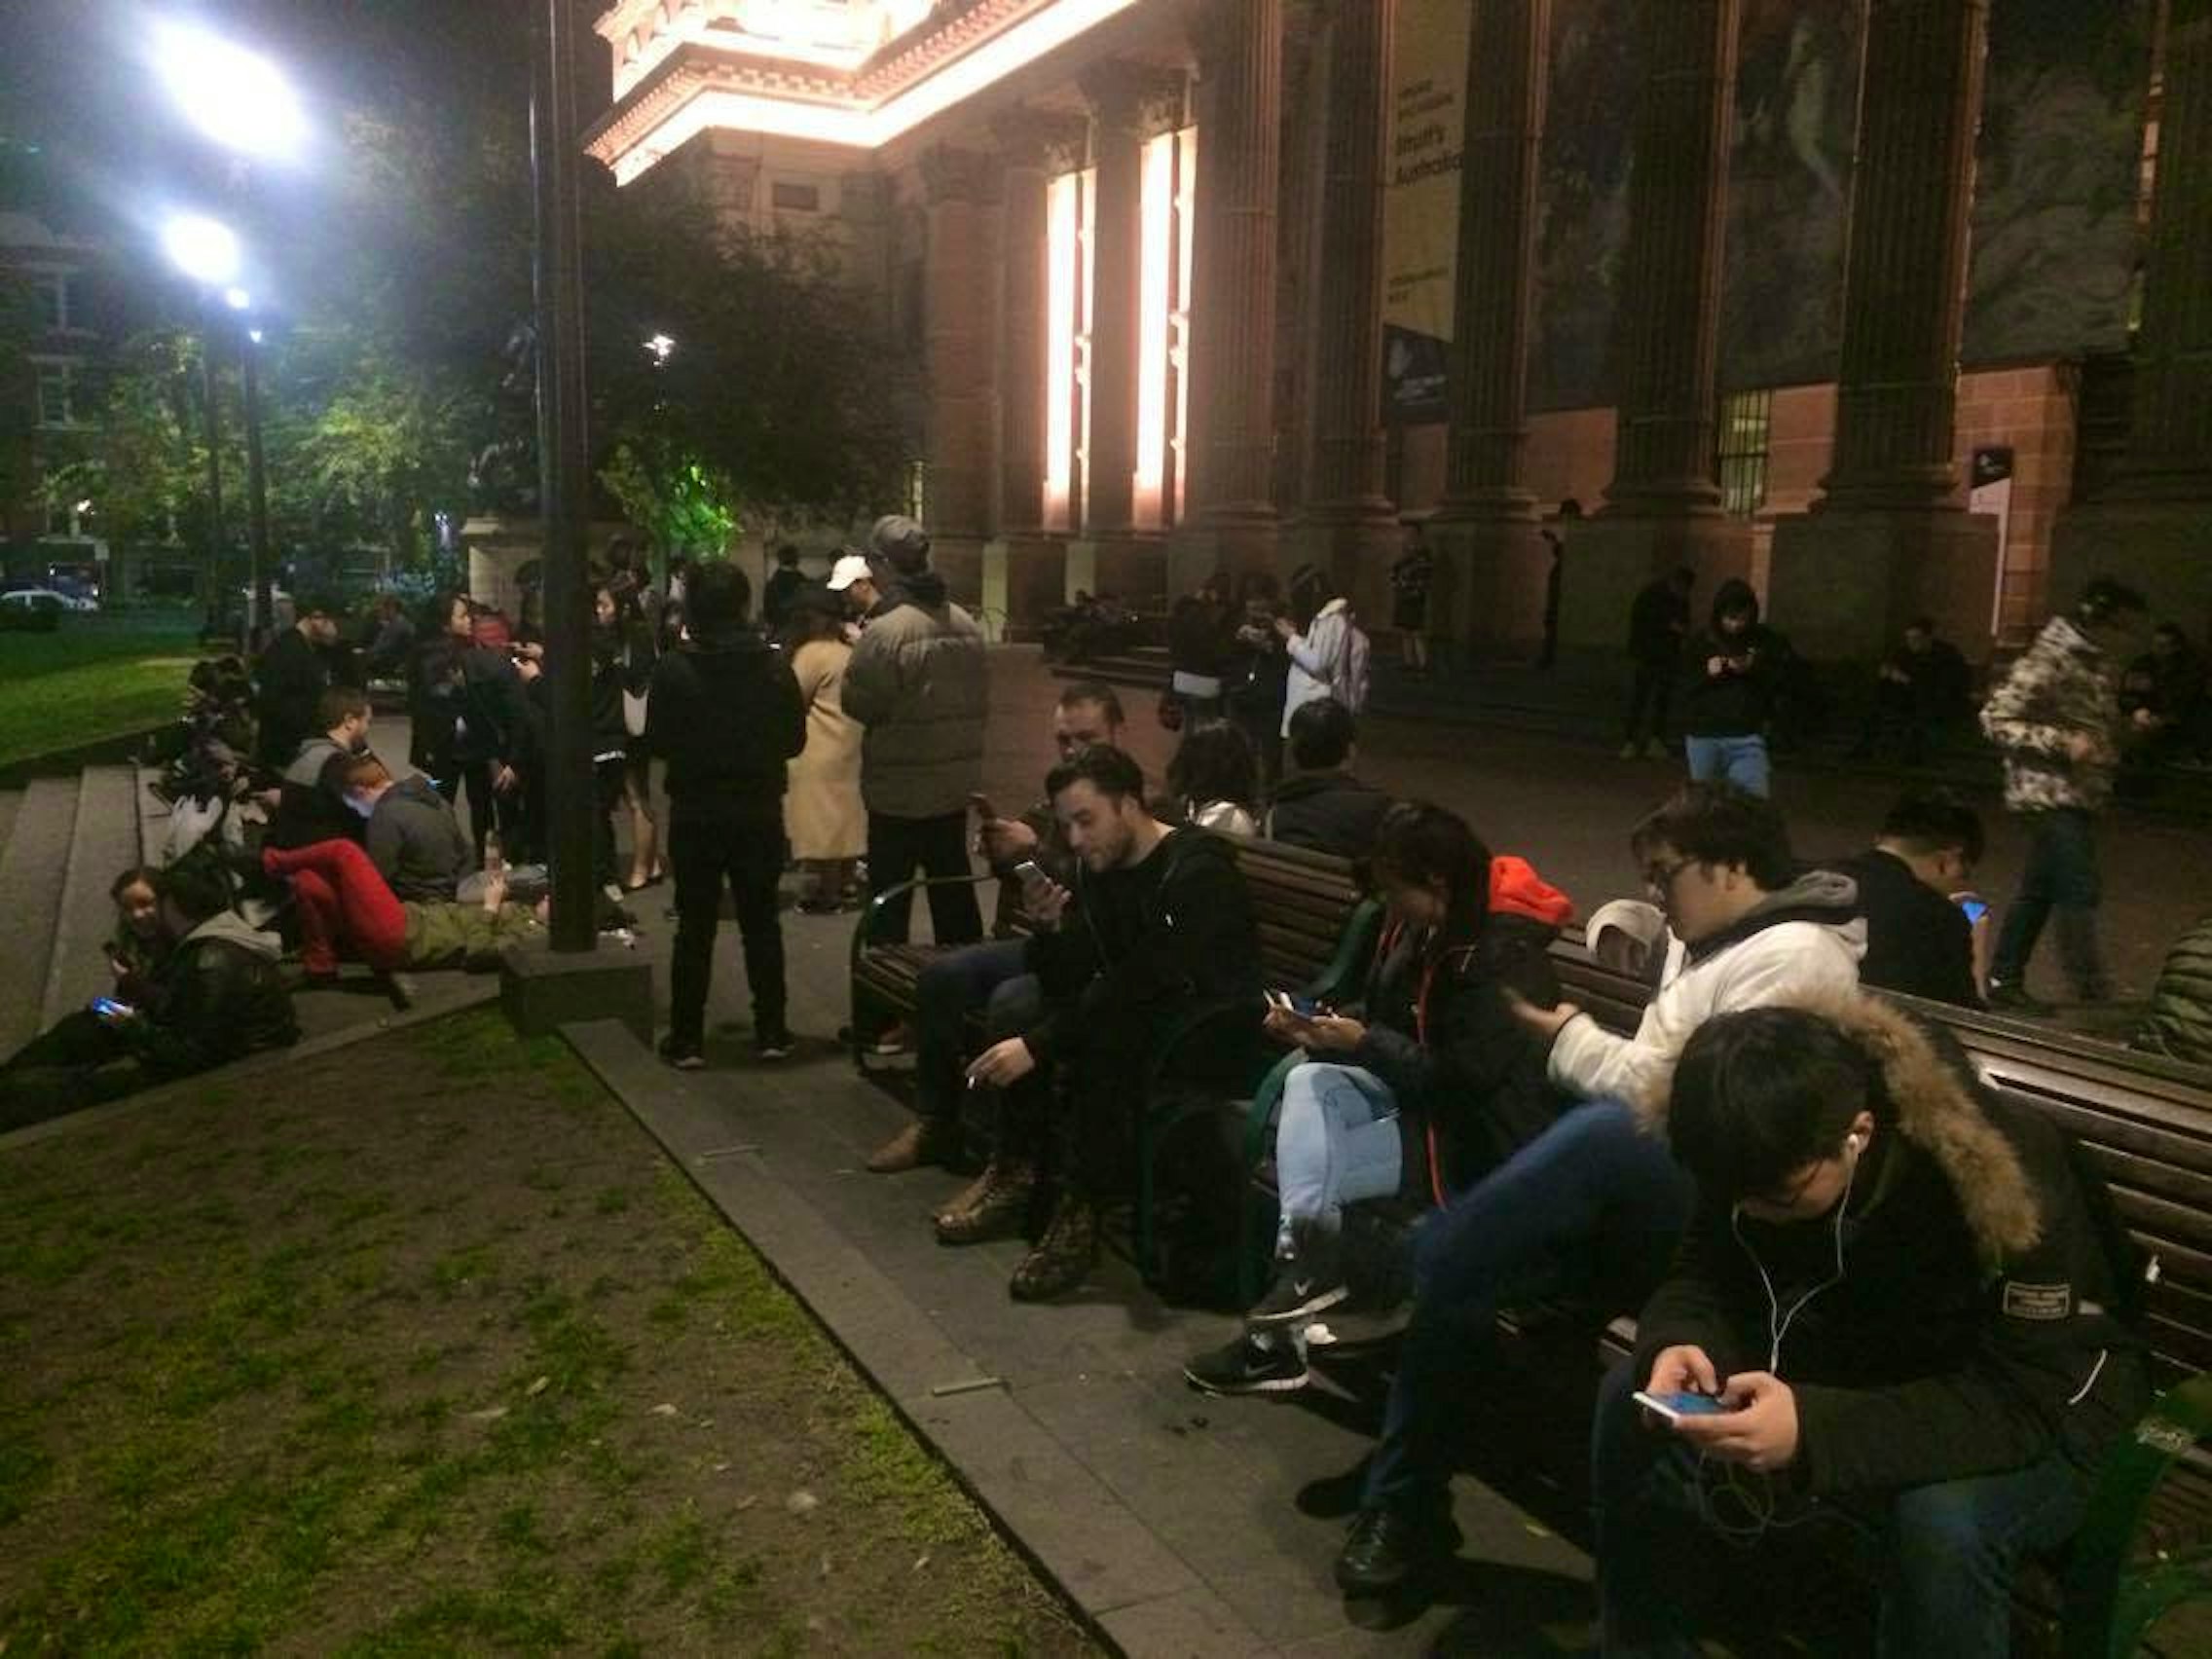 friday-night-at-melbourne-central-in-australia-with-over-a-dozen-people-seen-playing-pokemon-go.jpeg